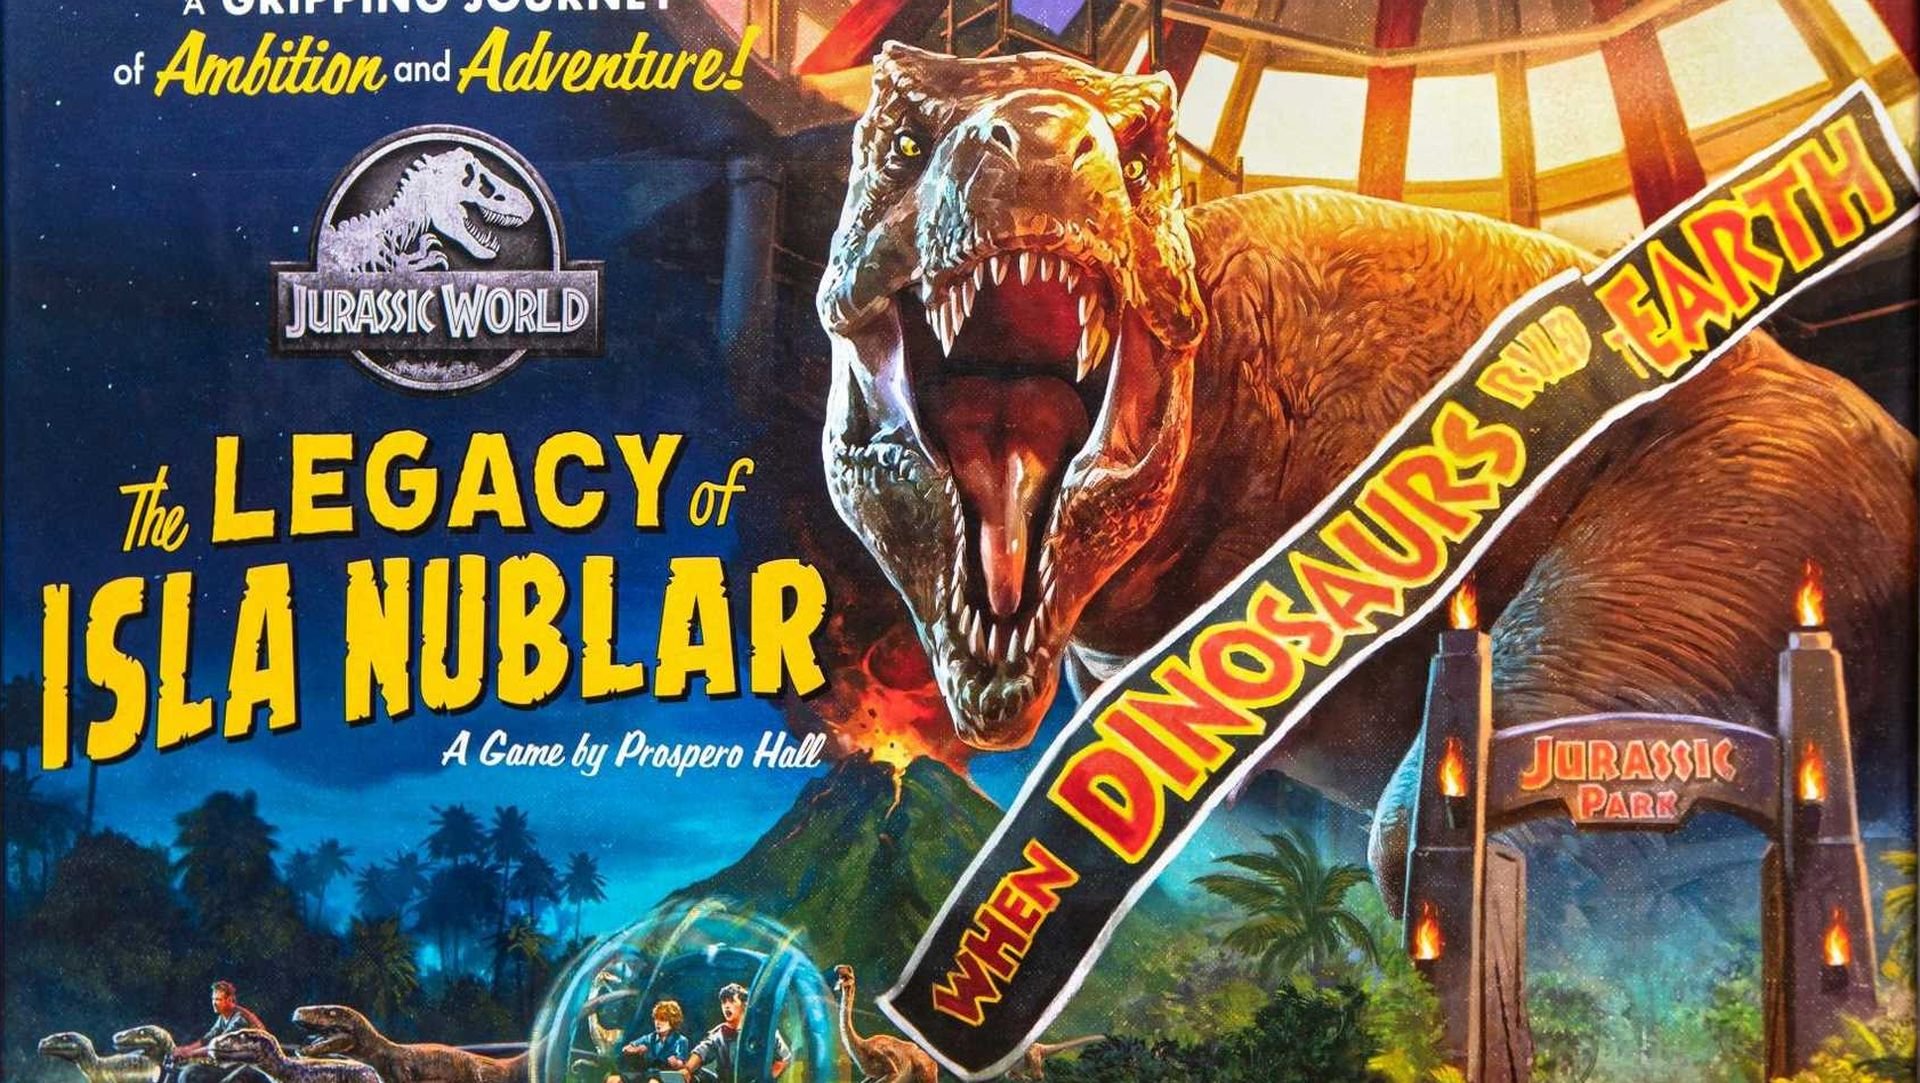 Jurassic Park Survival Release Window, Trailer, Gameplay, and More